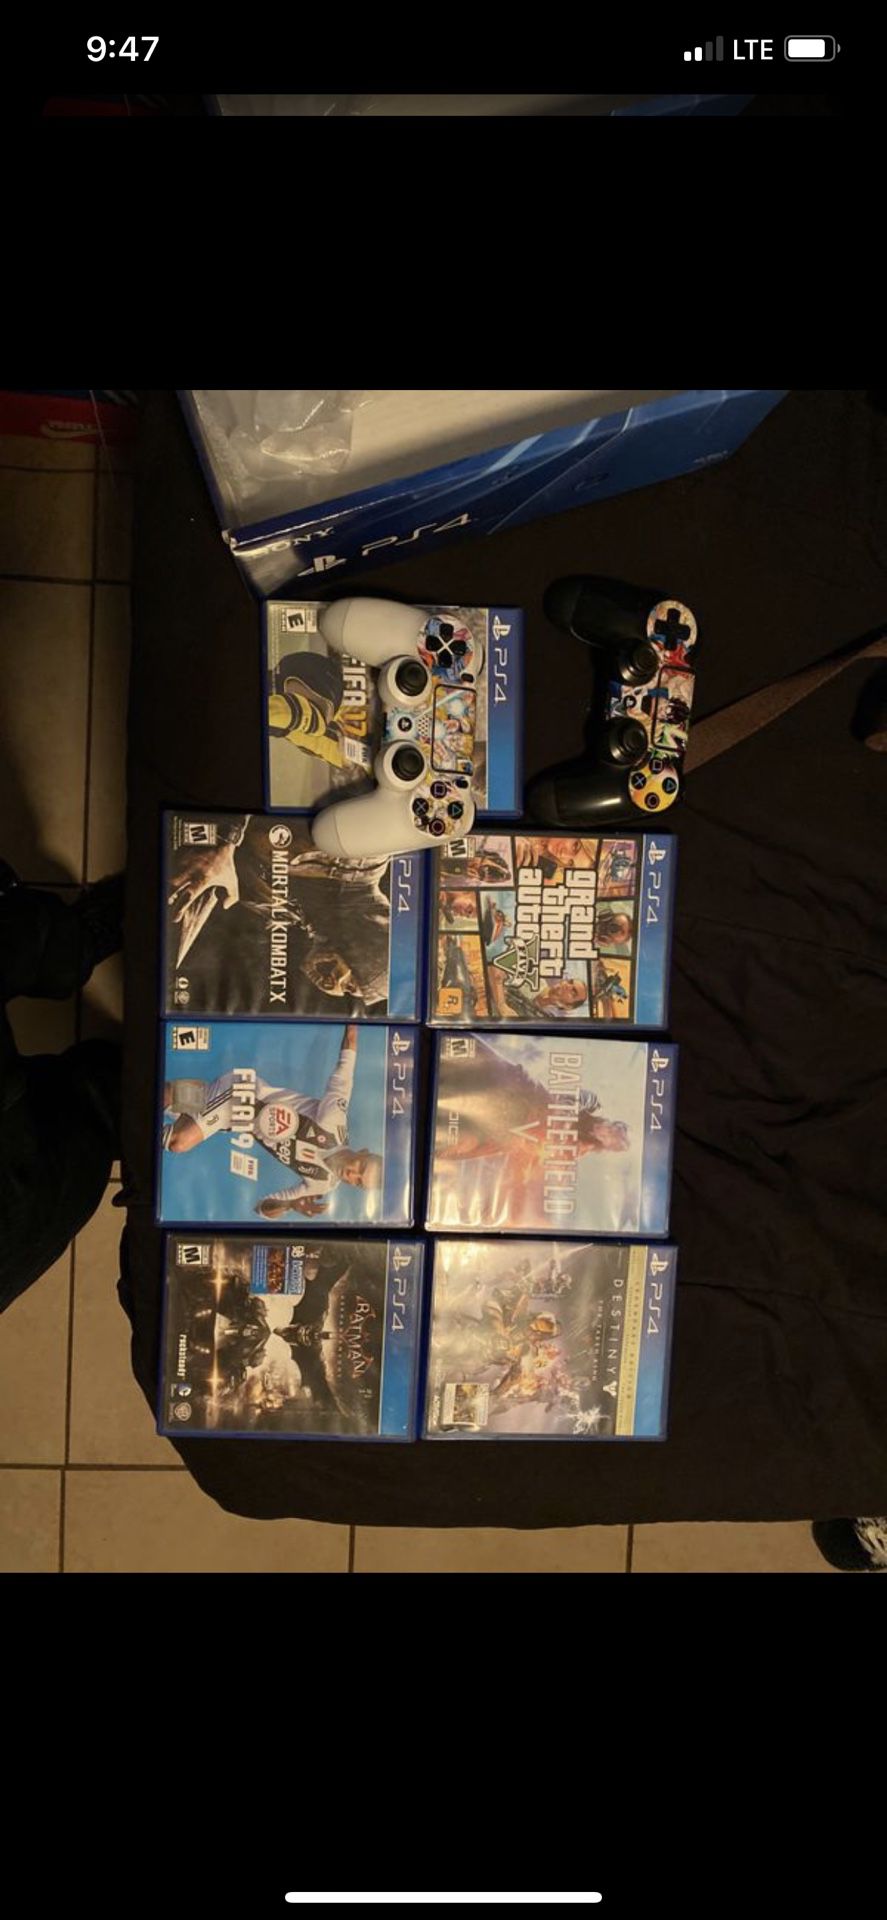 PS4 Games and Controllers